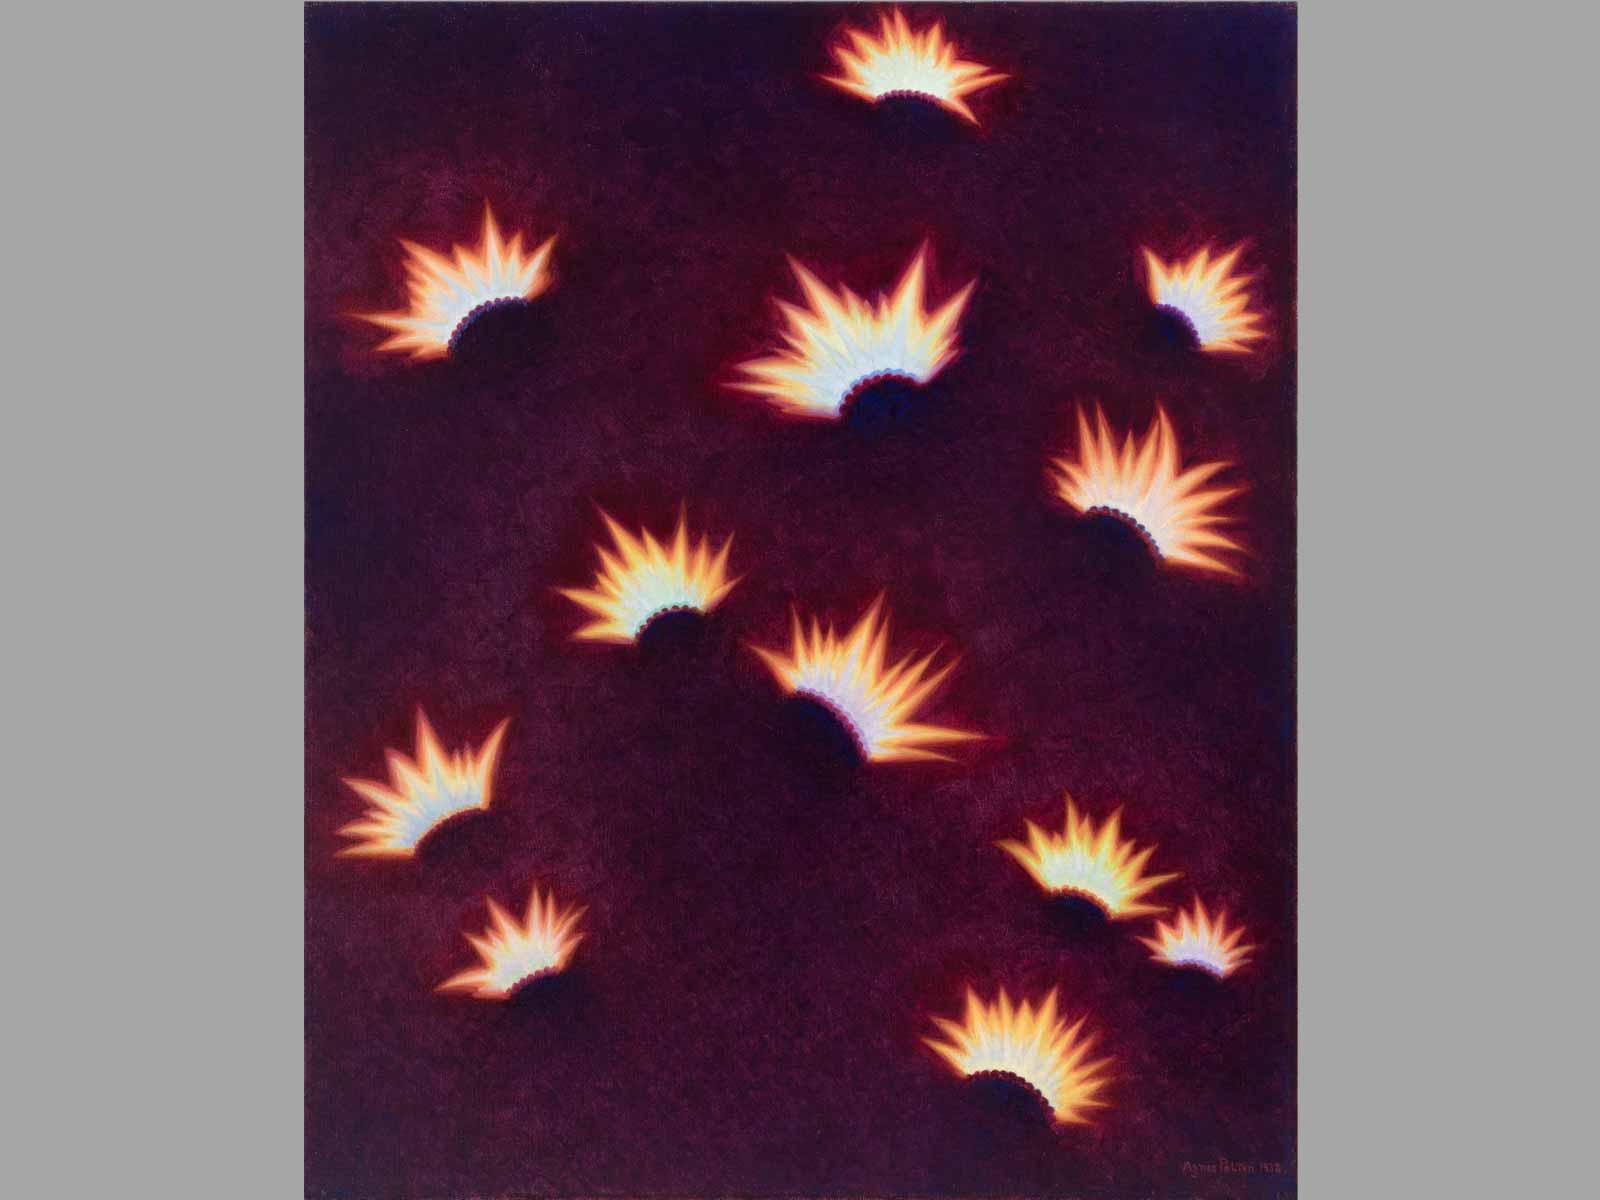 Agnes Pelton, Fires in Space, 1933.